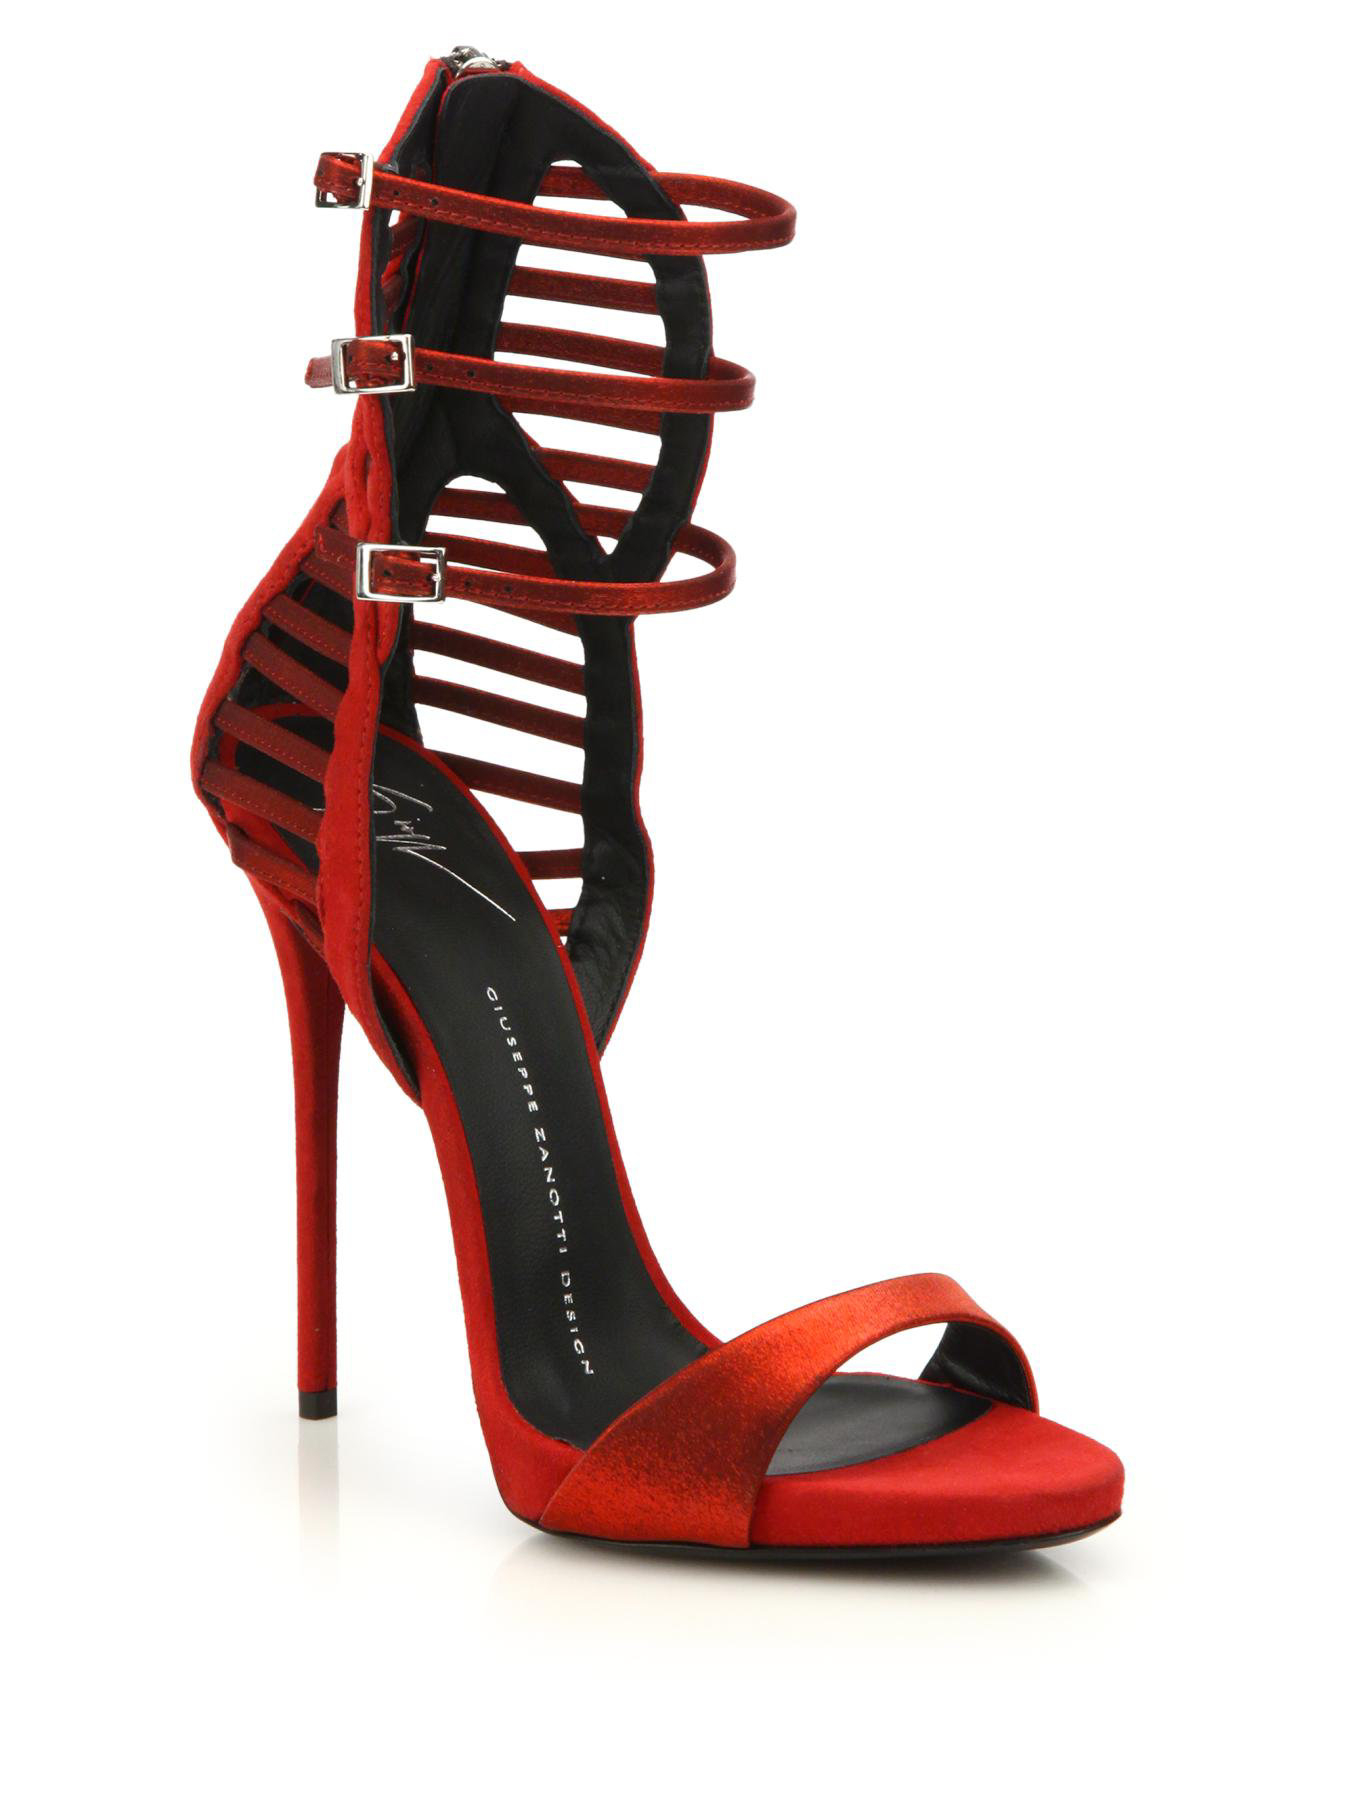 Giuseppe Zanotti Suede & Satin Cage Sandals in Red | Lyst